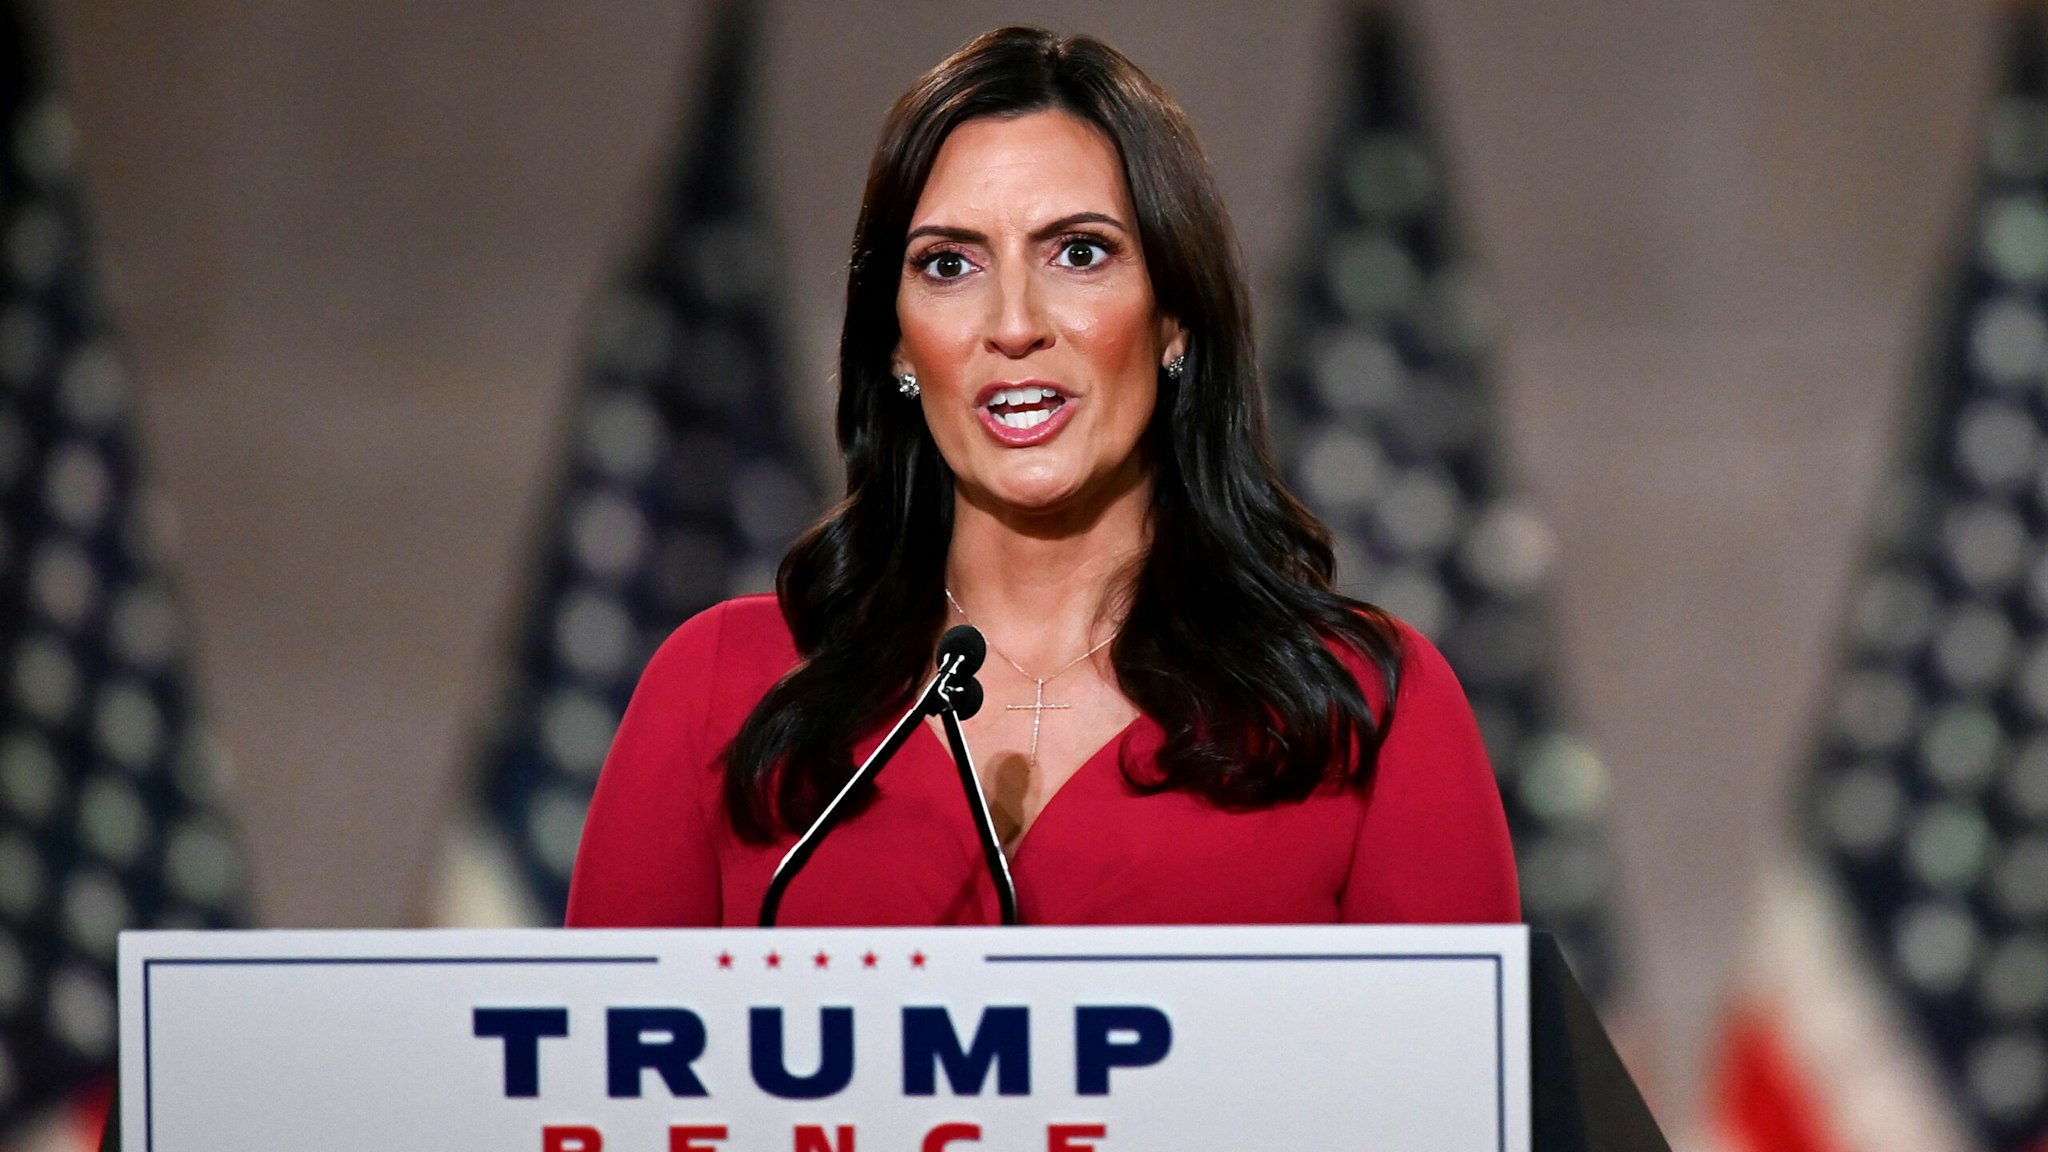 Lieutenant Governor of Florida Jeanette Nunez speaks during the second day of the Republican convention at the Mellon auditorium on August 25, 2020 in Washington, DC.